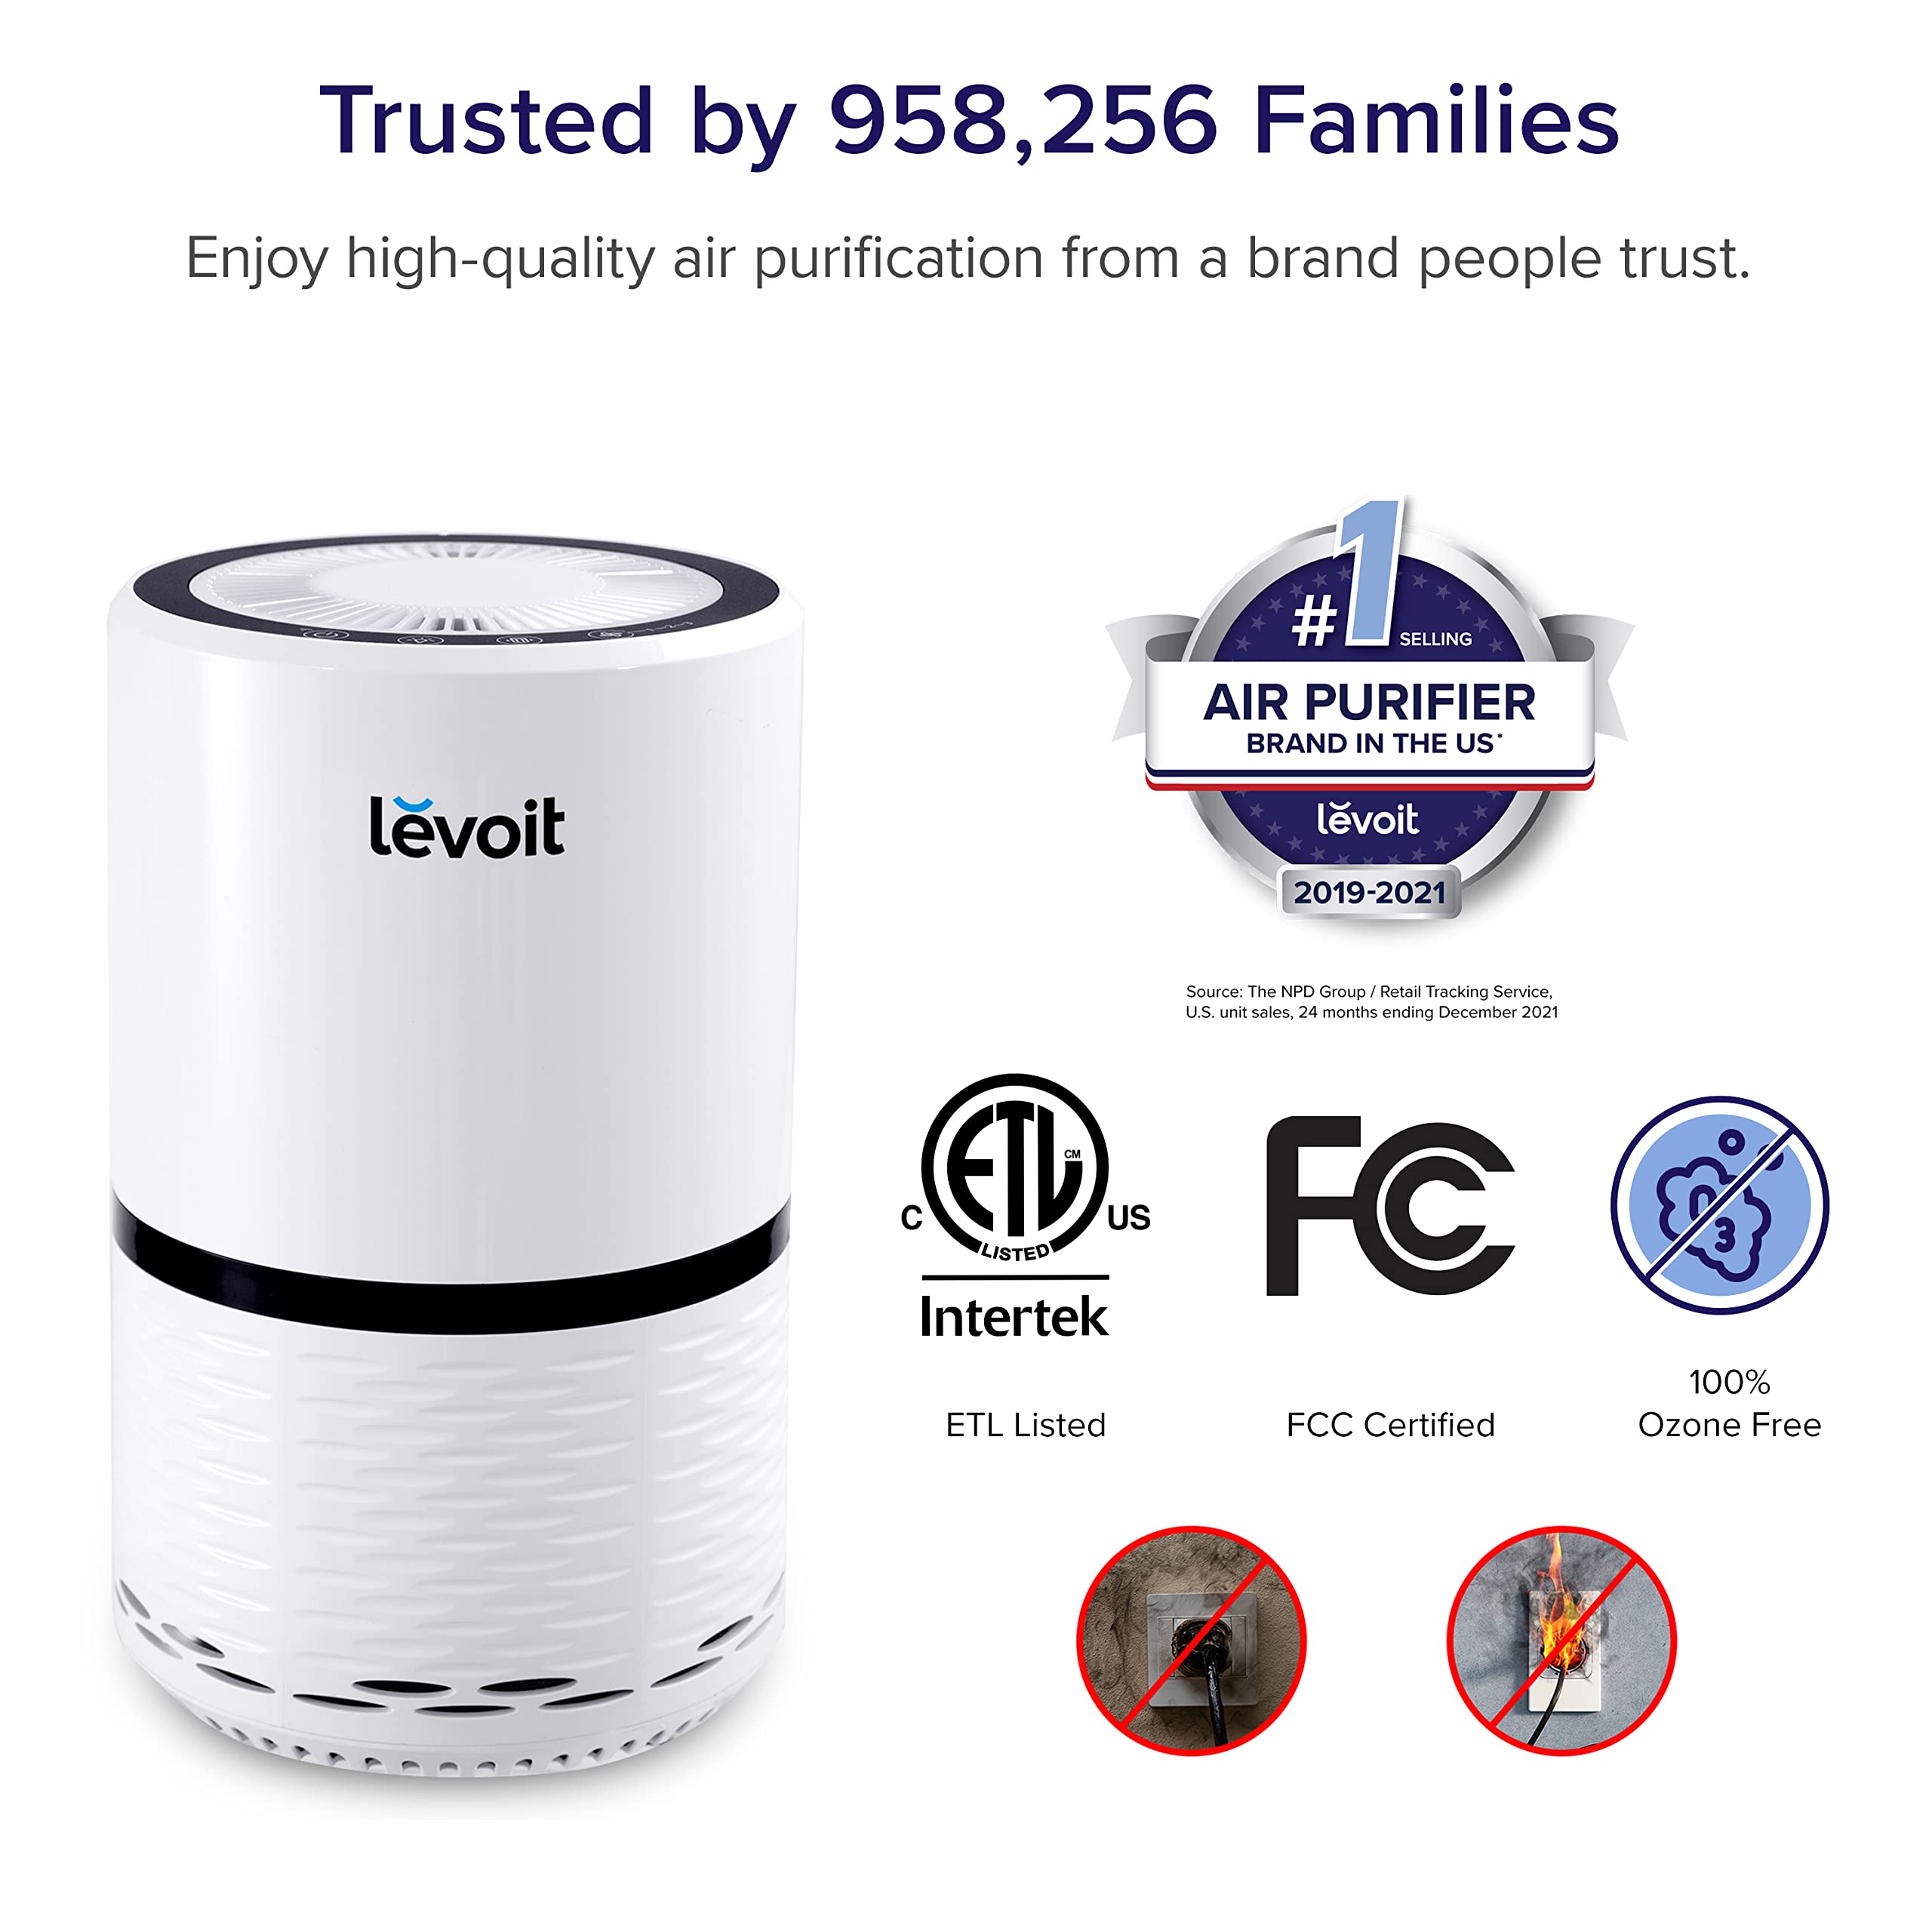 LEVOIT Air Purifiers for Home, HEPA Filter for Smoke, Dust and Pollen in Bedroom, Ozone Free, Filtration System Odor Eliminators for Office with Optional Night Light, 1 Pack, White